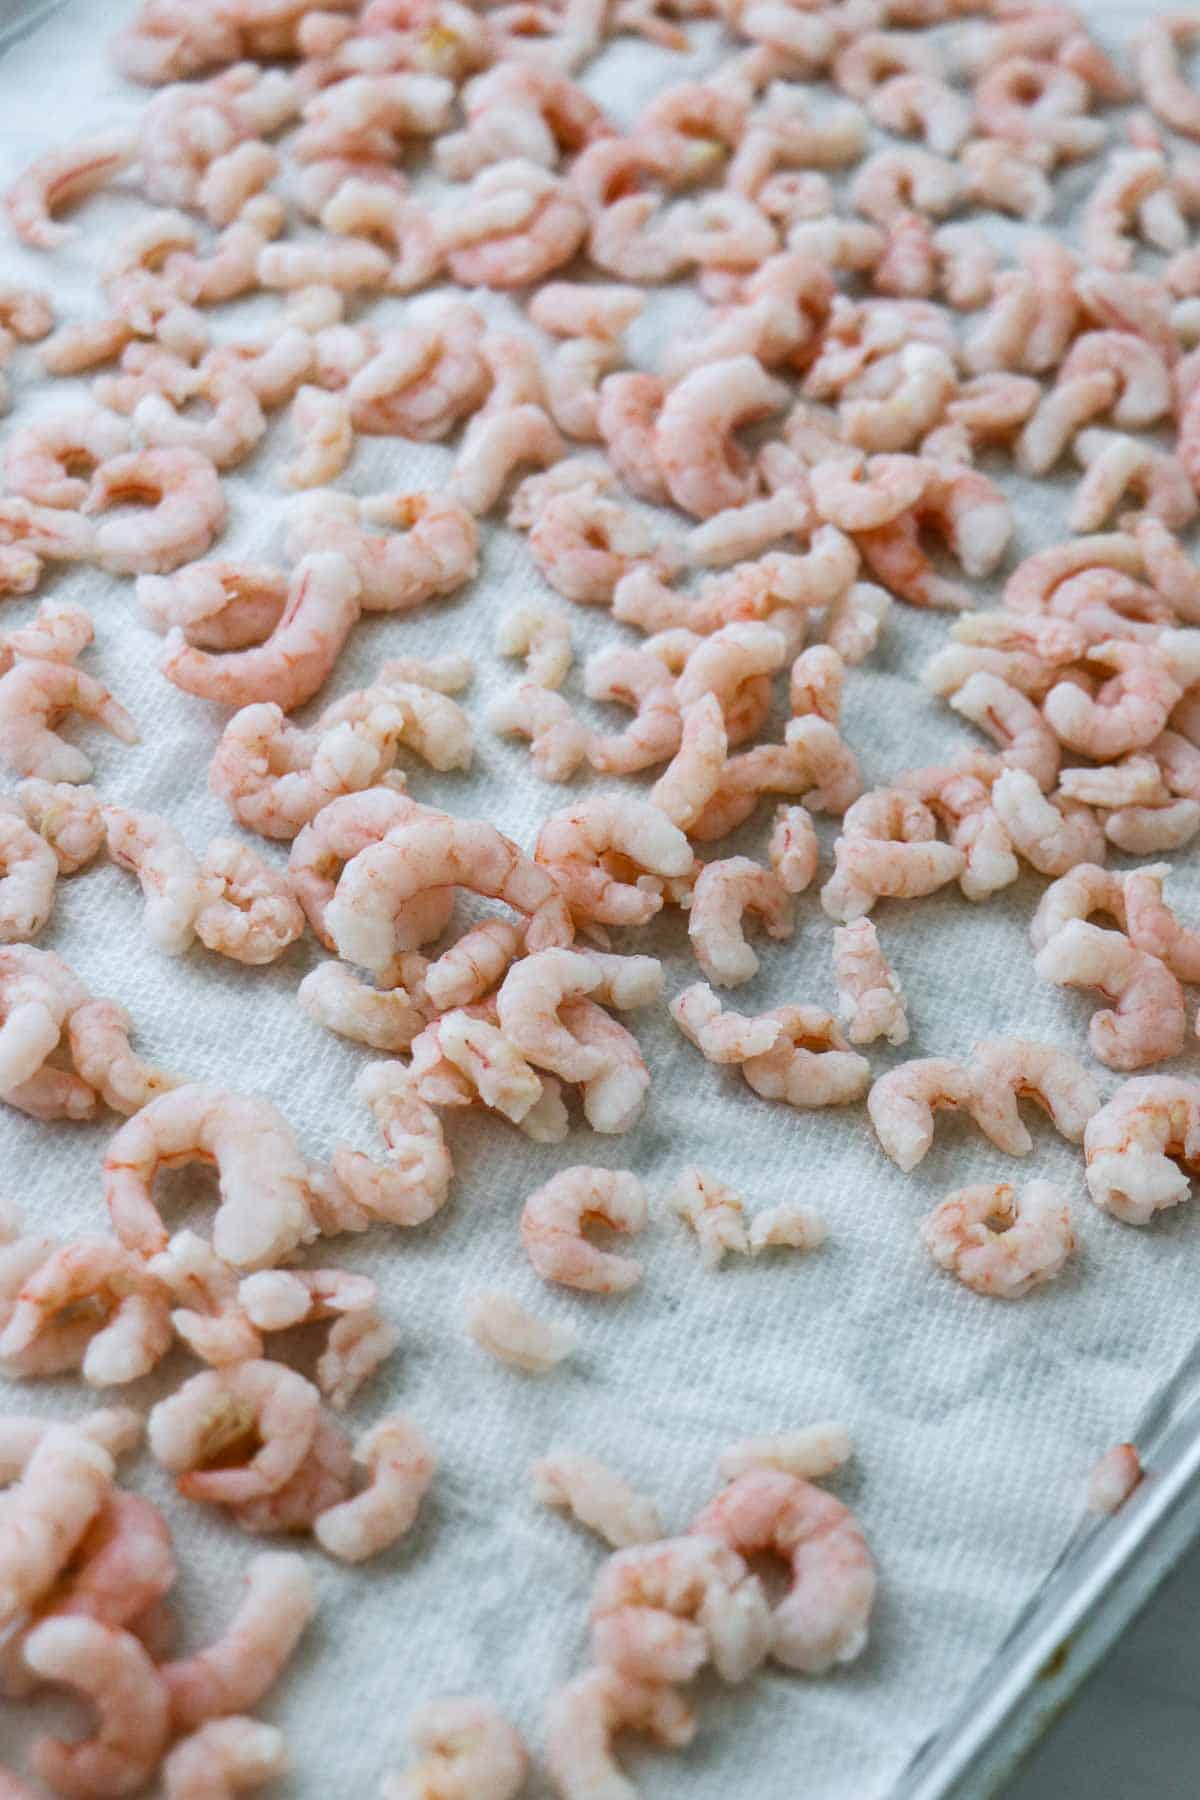 Small cooked shrimp on a paper towel-lined baking sheet.